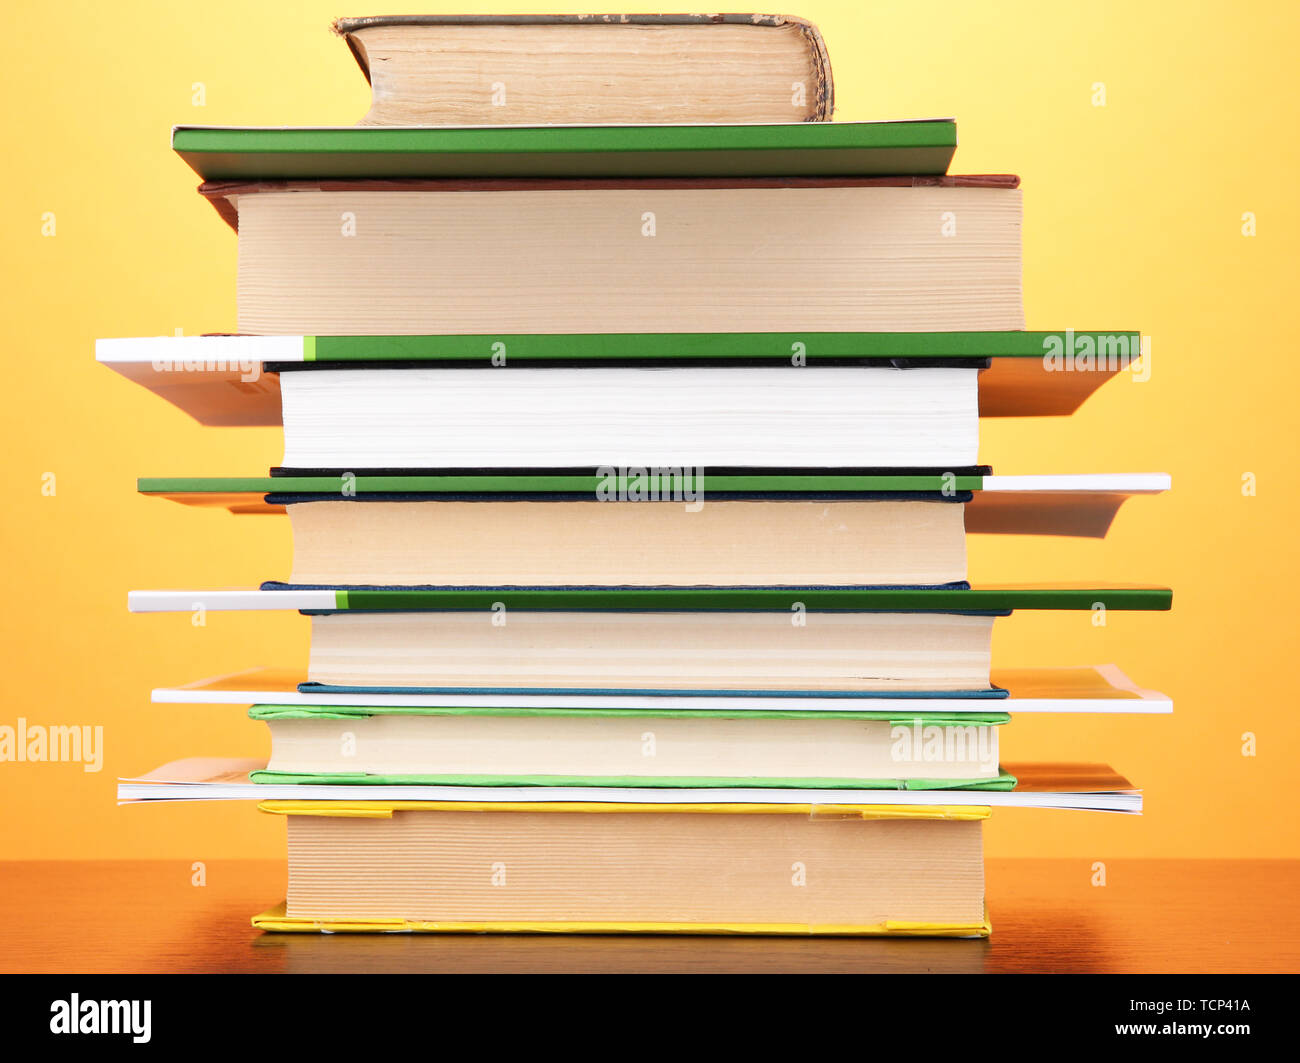 Stack of interesting books and magazines on wooden table on orange background Stock Photo